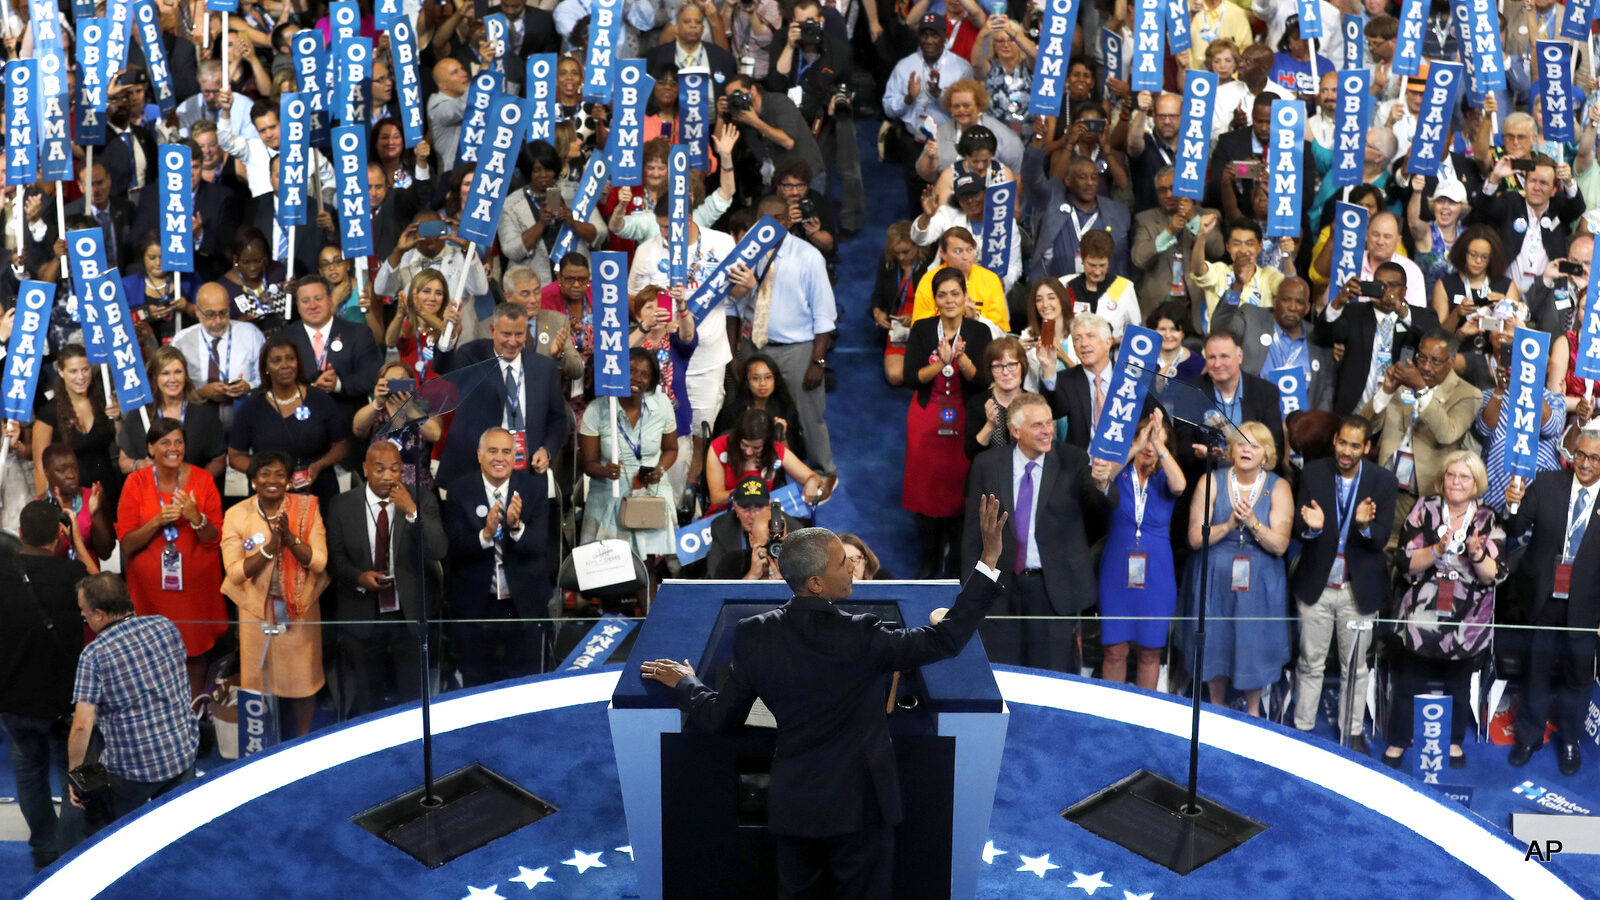 President Barack Obama waves to the delegates before speaking during the third day of the Democratic National Convention in Philadelphia , Wednesday, July 27, 2016.